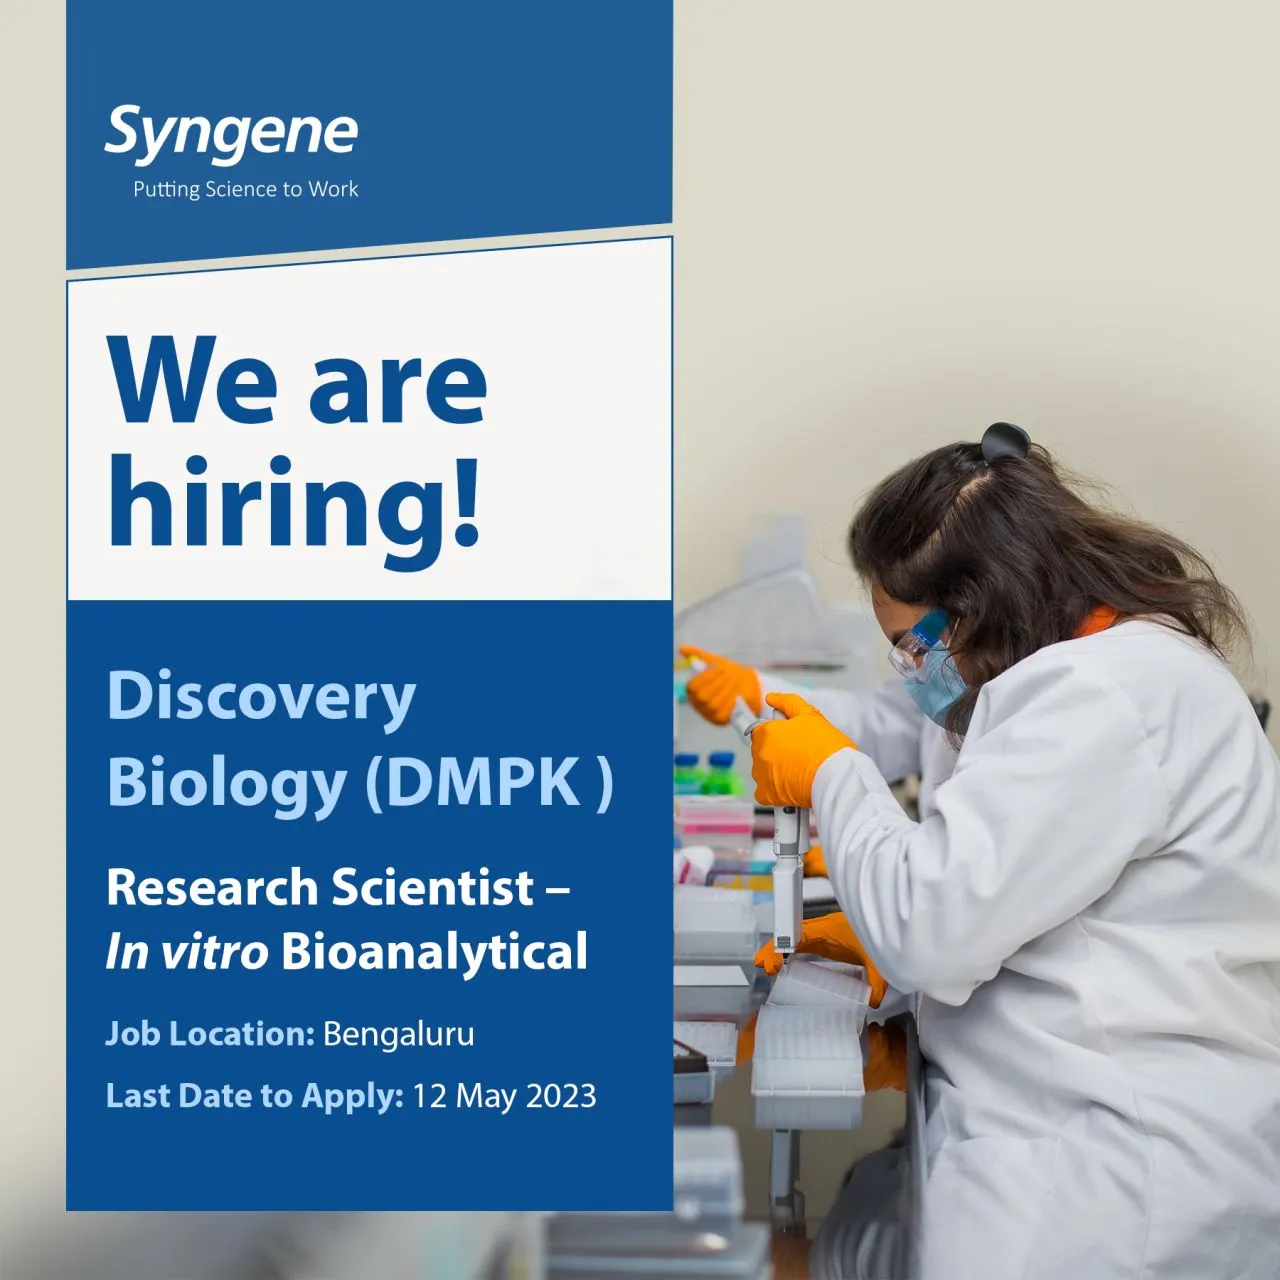 %titl Syngene International Limited Job vacancy for Research Scientist In vitro Bioanalytical for DMPK team Discovery Biology